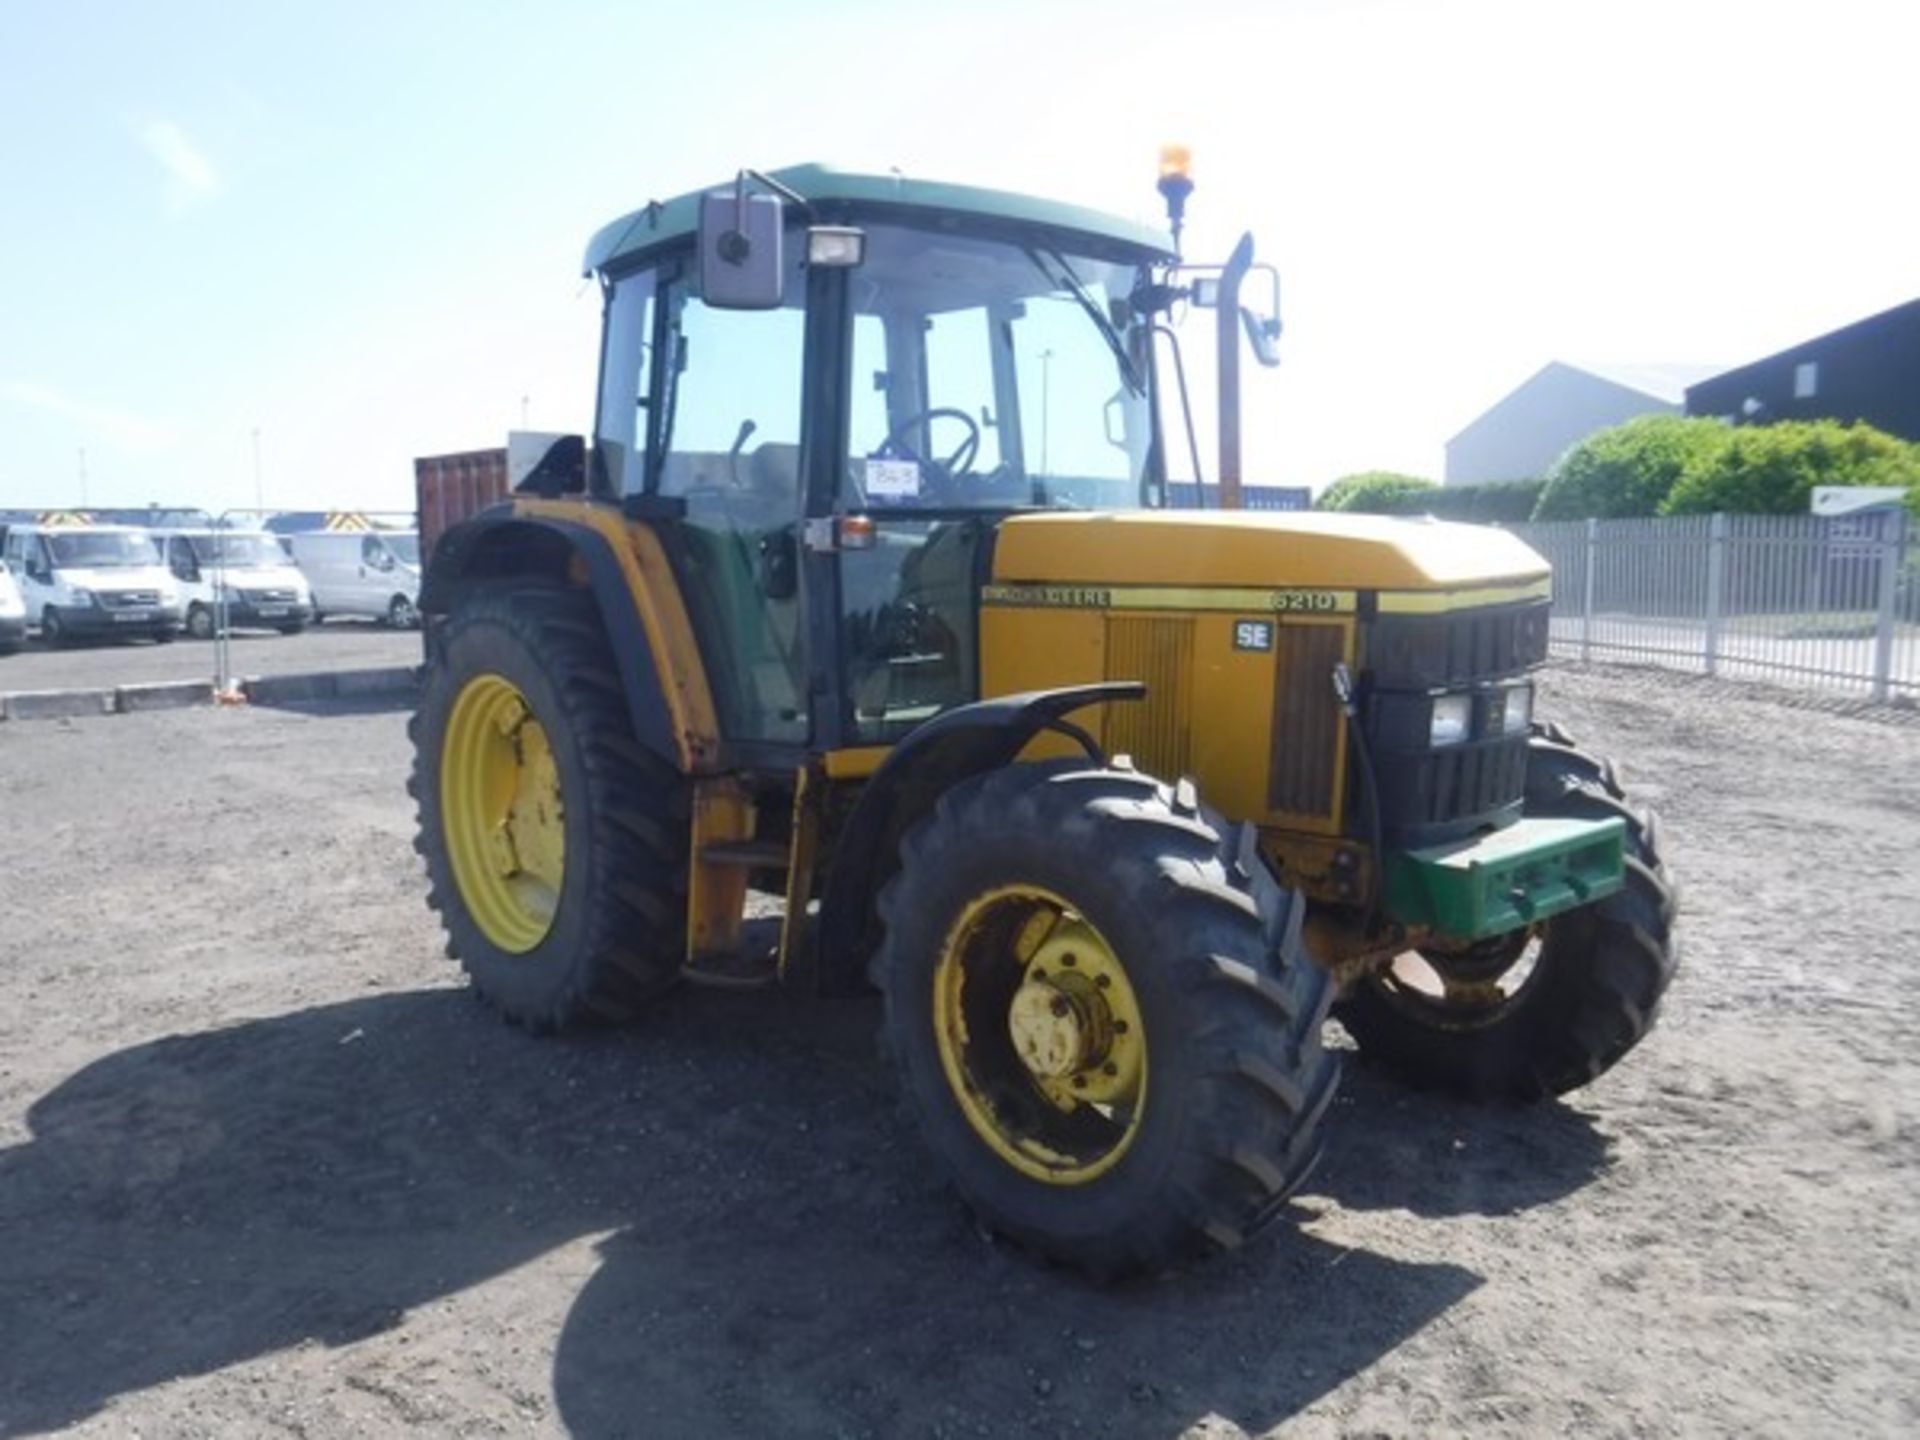 2000 JOHN DEERE 6210 tractor. Reg No W64 RKS s/n 106210Y278541. Hrs not known. Engine starting issu - Image 23 of 35